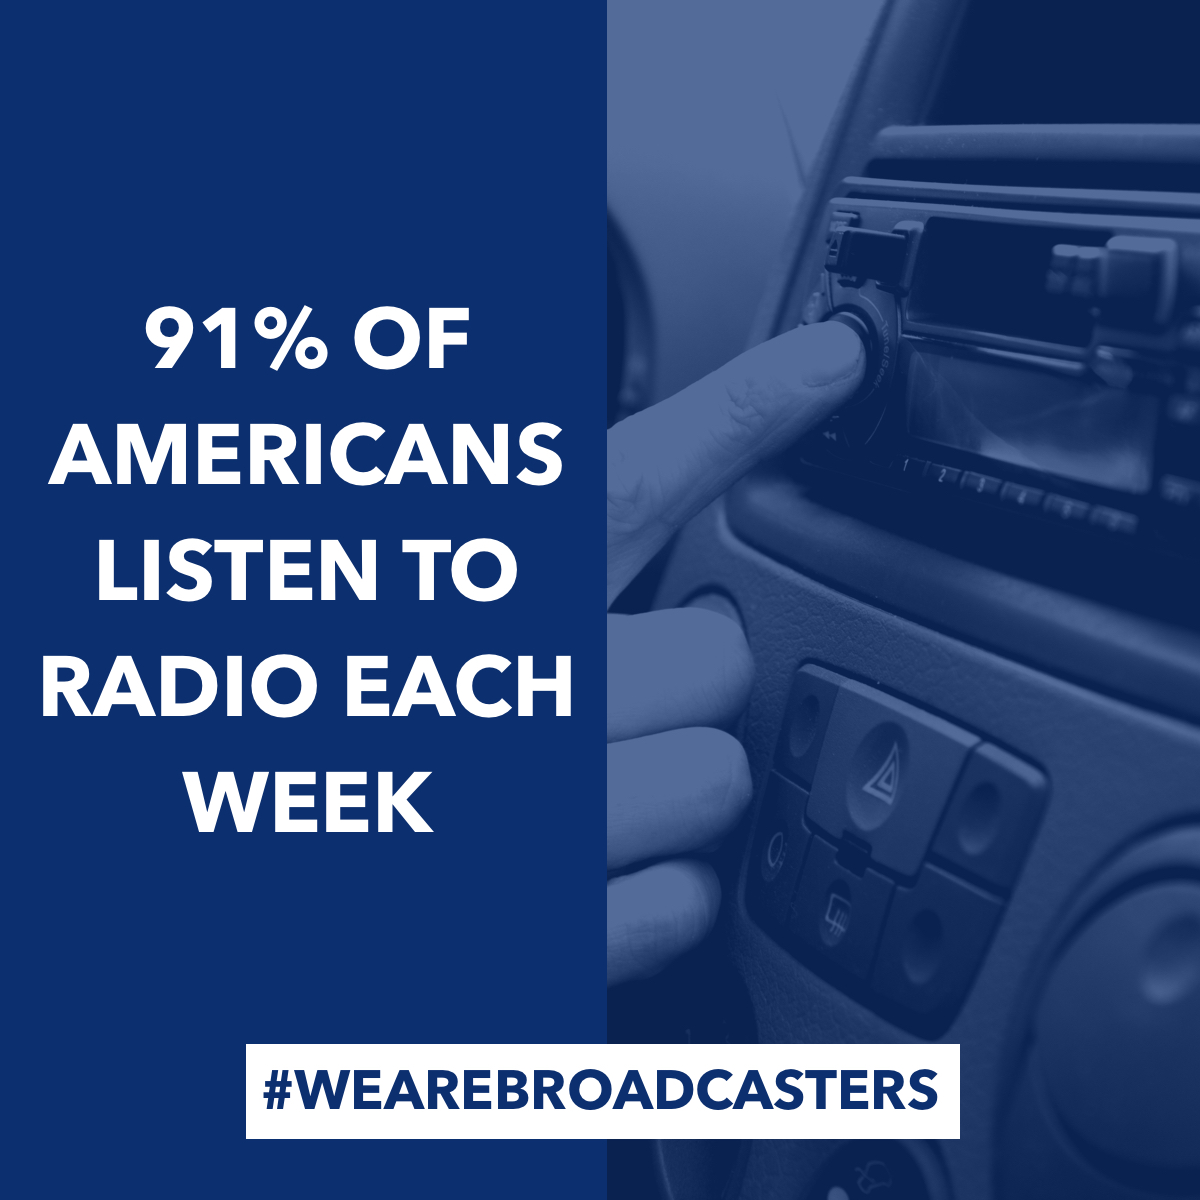 More than 272 million listeners turn to local radio each week to get the music they want